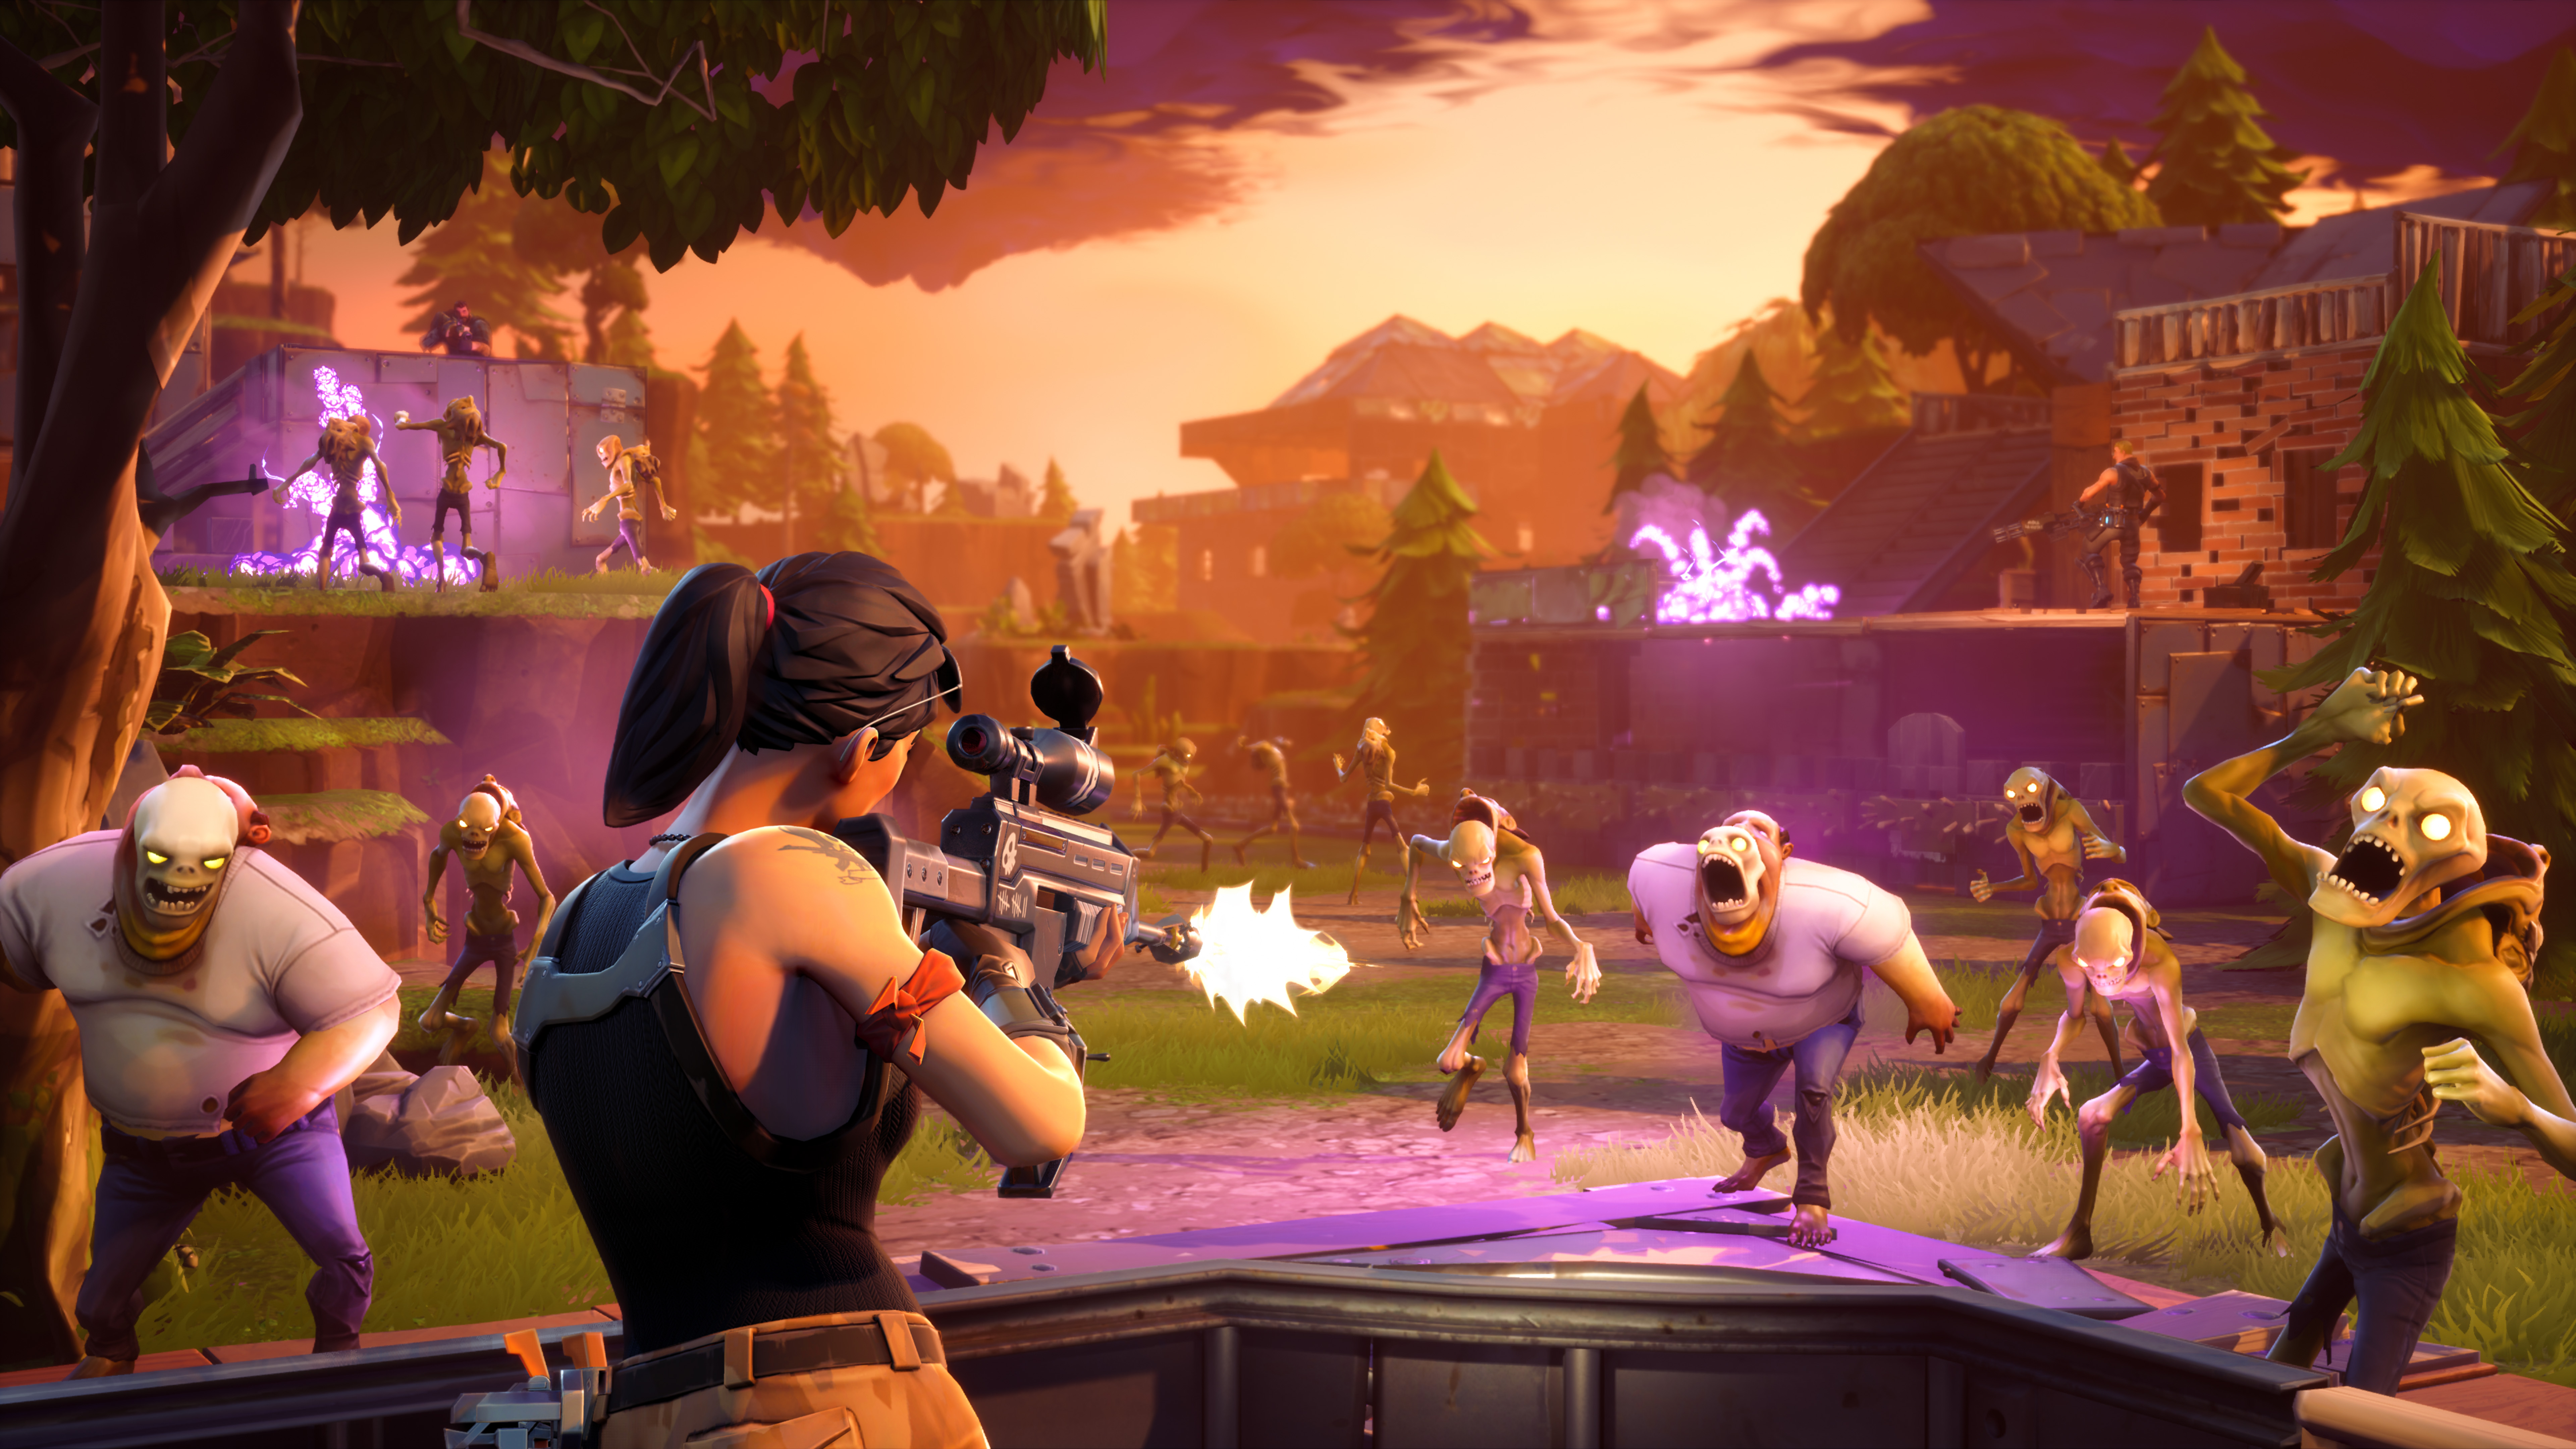 Fortnite Poisons A Potentially Great Game With Agonizing F2p